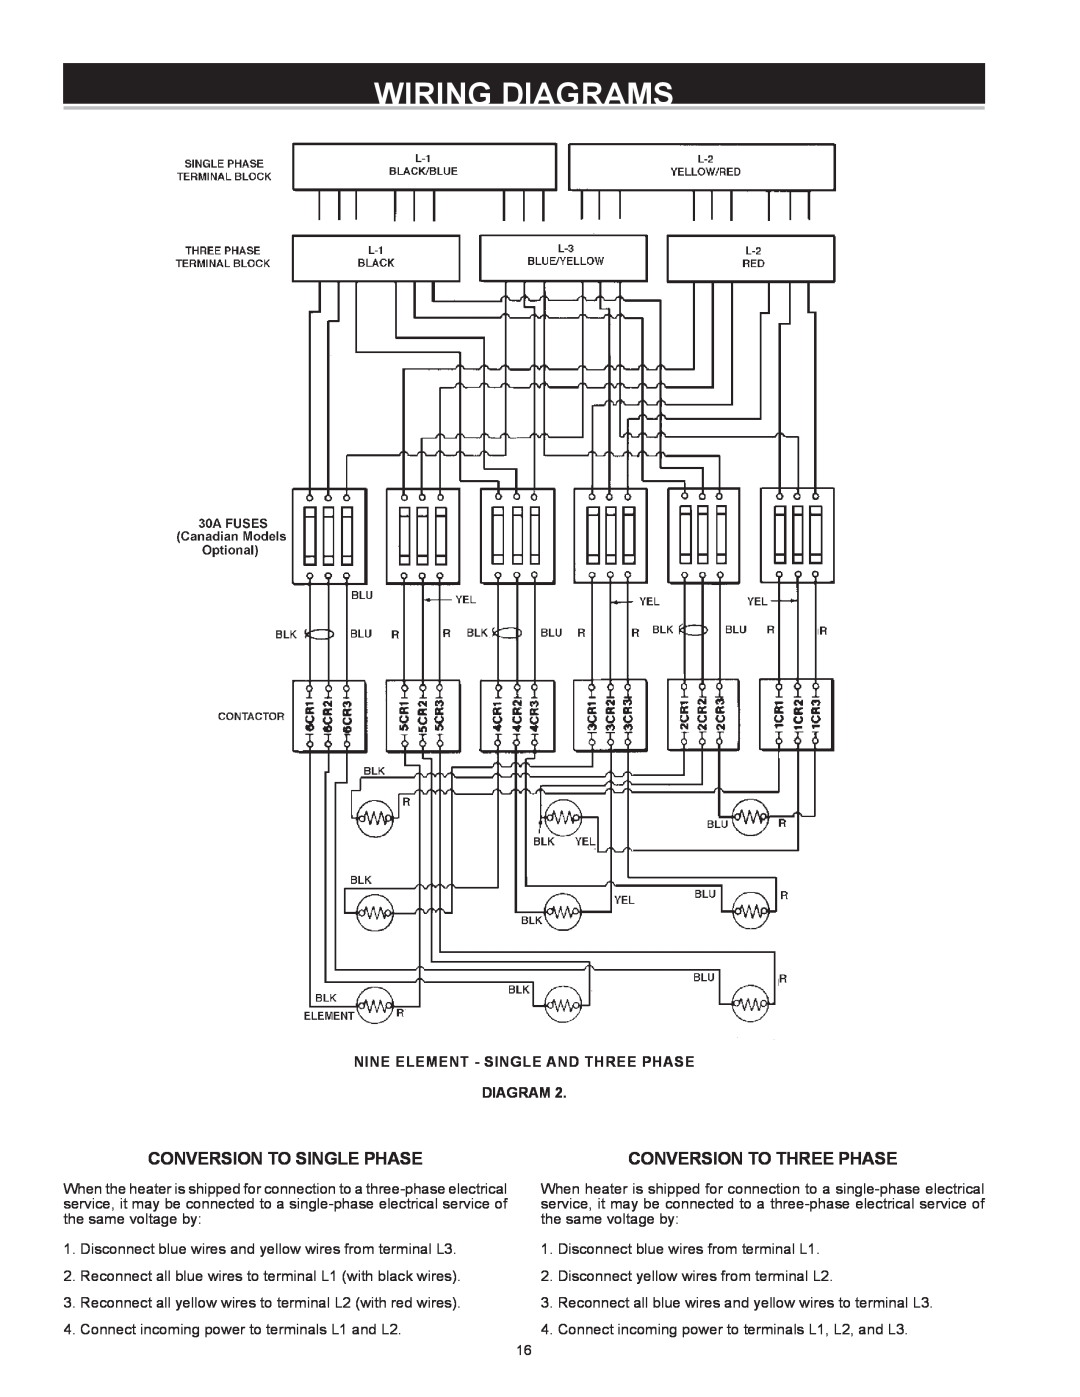 A.O. Smith Dve-52/80/120 instruction manual Conversion To Single Phase, Conversion To Three Phase, Wiring Diagrams 